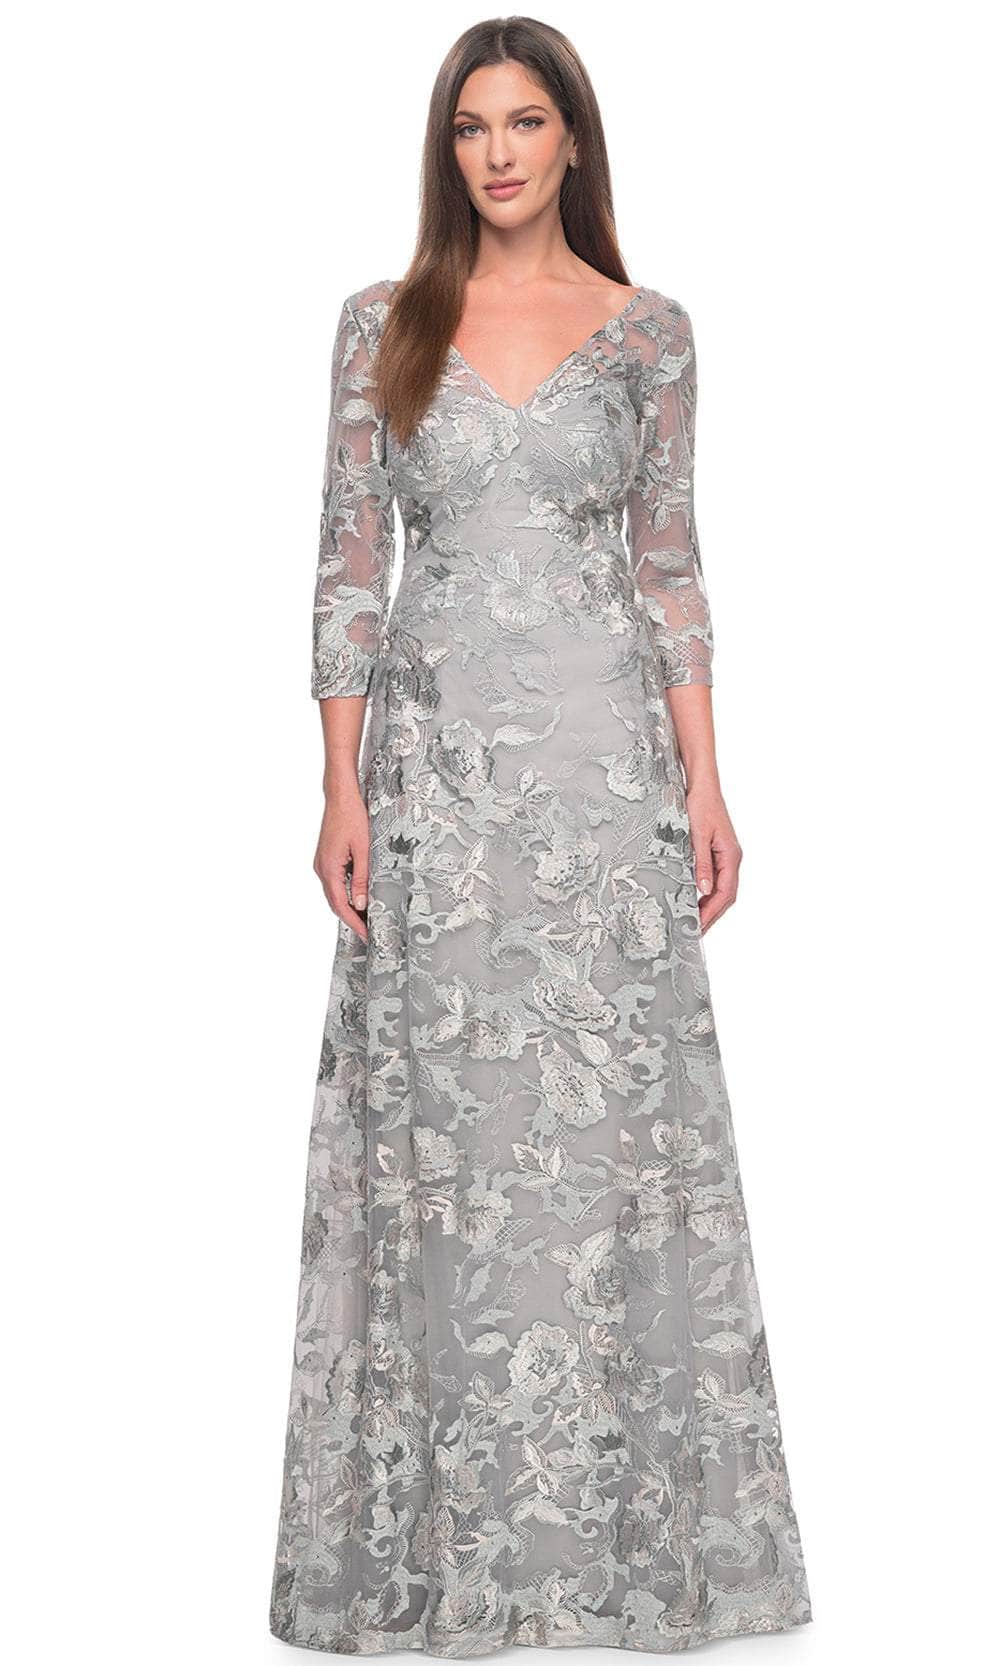 Image of La Femme 30062 - Embroidered Quarter Sleeve Prom Gown